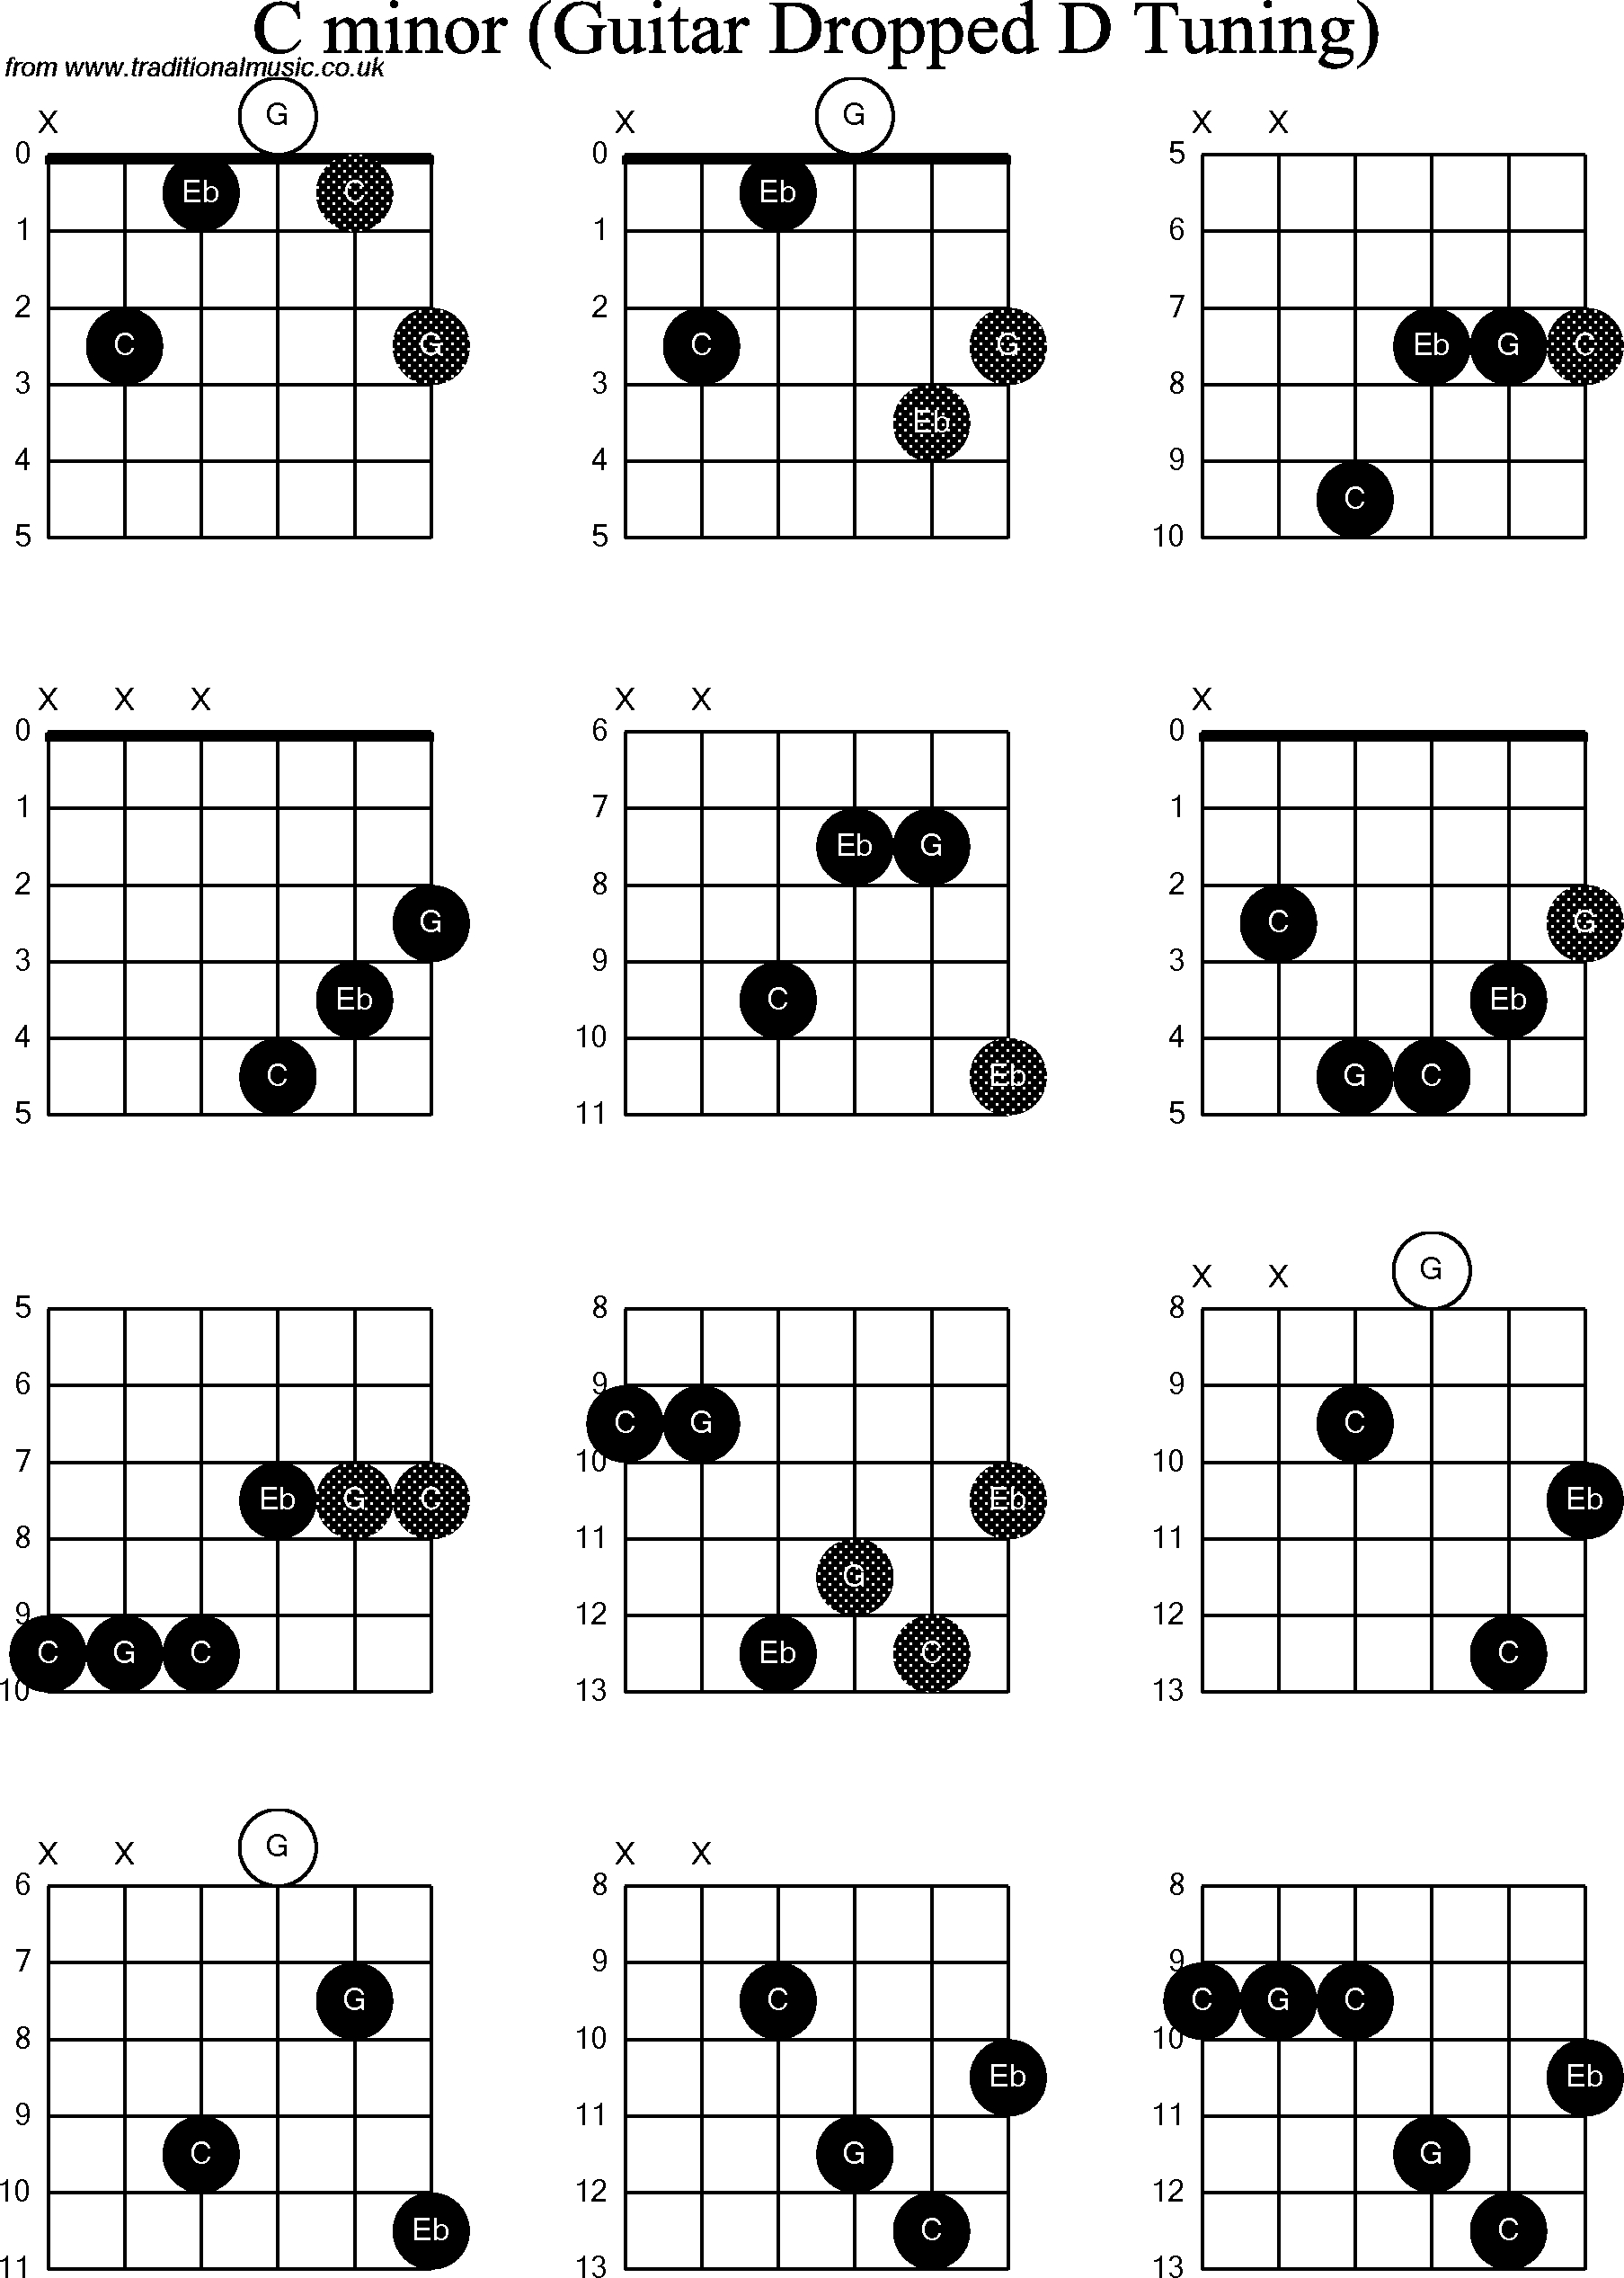 C Minor Chord Chord Diagrams For Dropped D Guitardadgbe C Minor